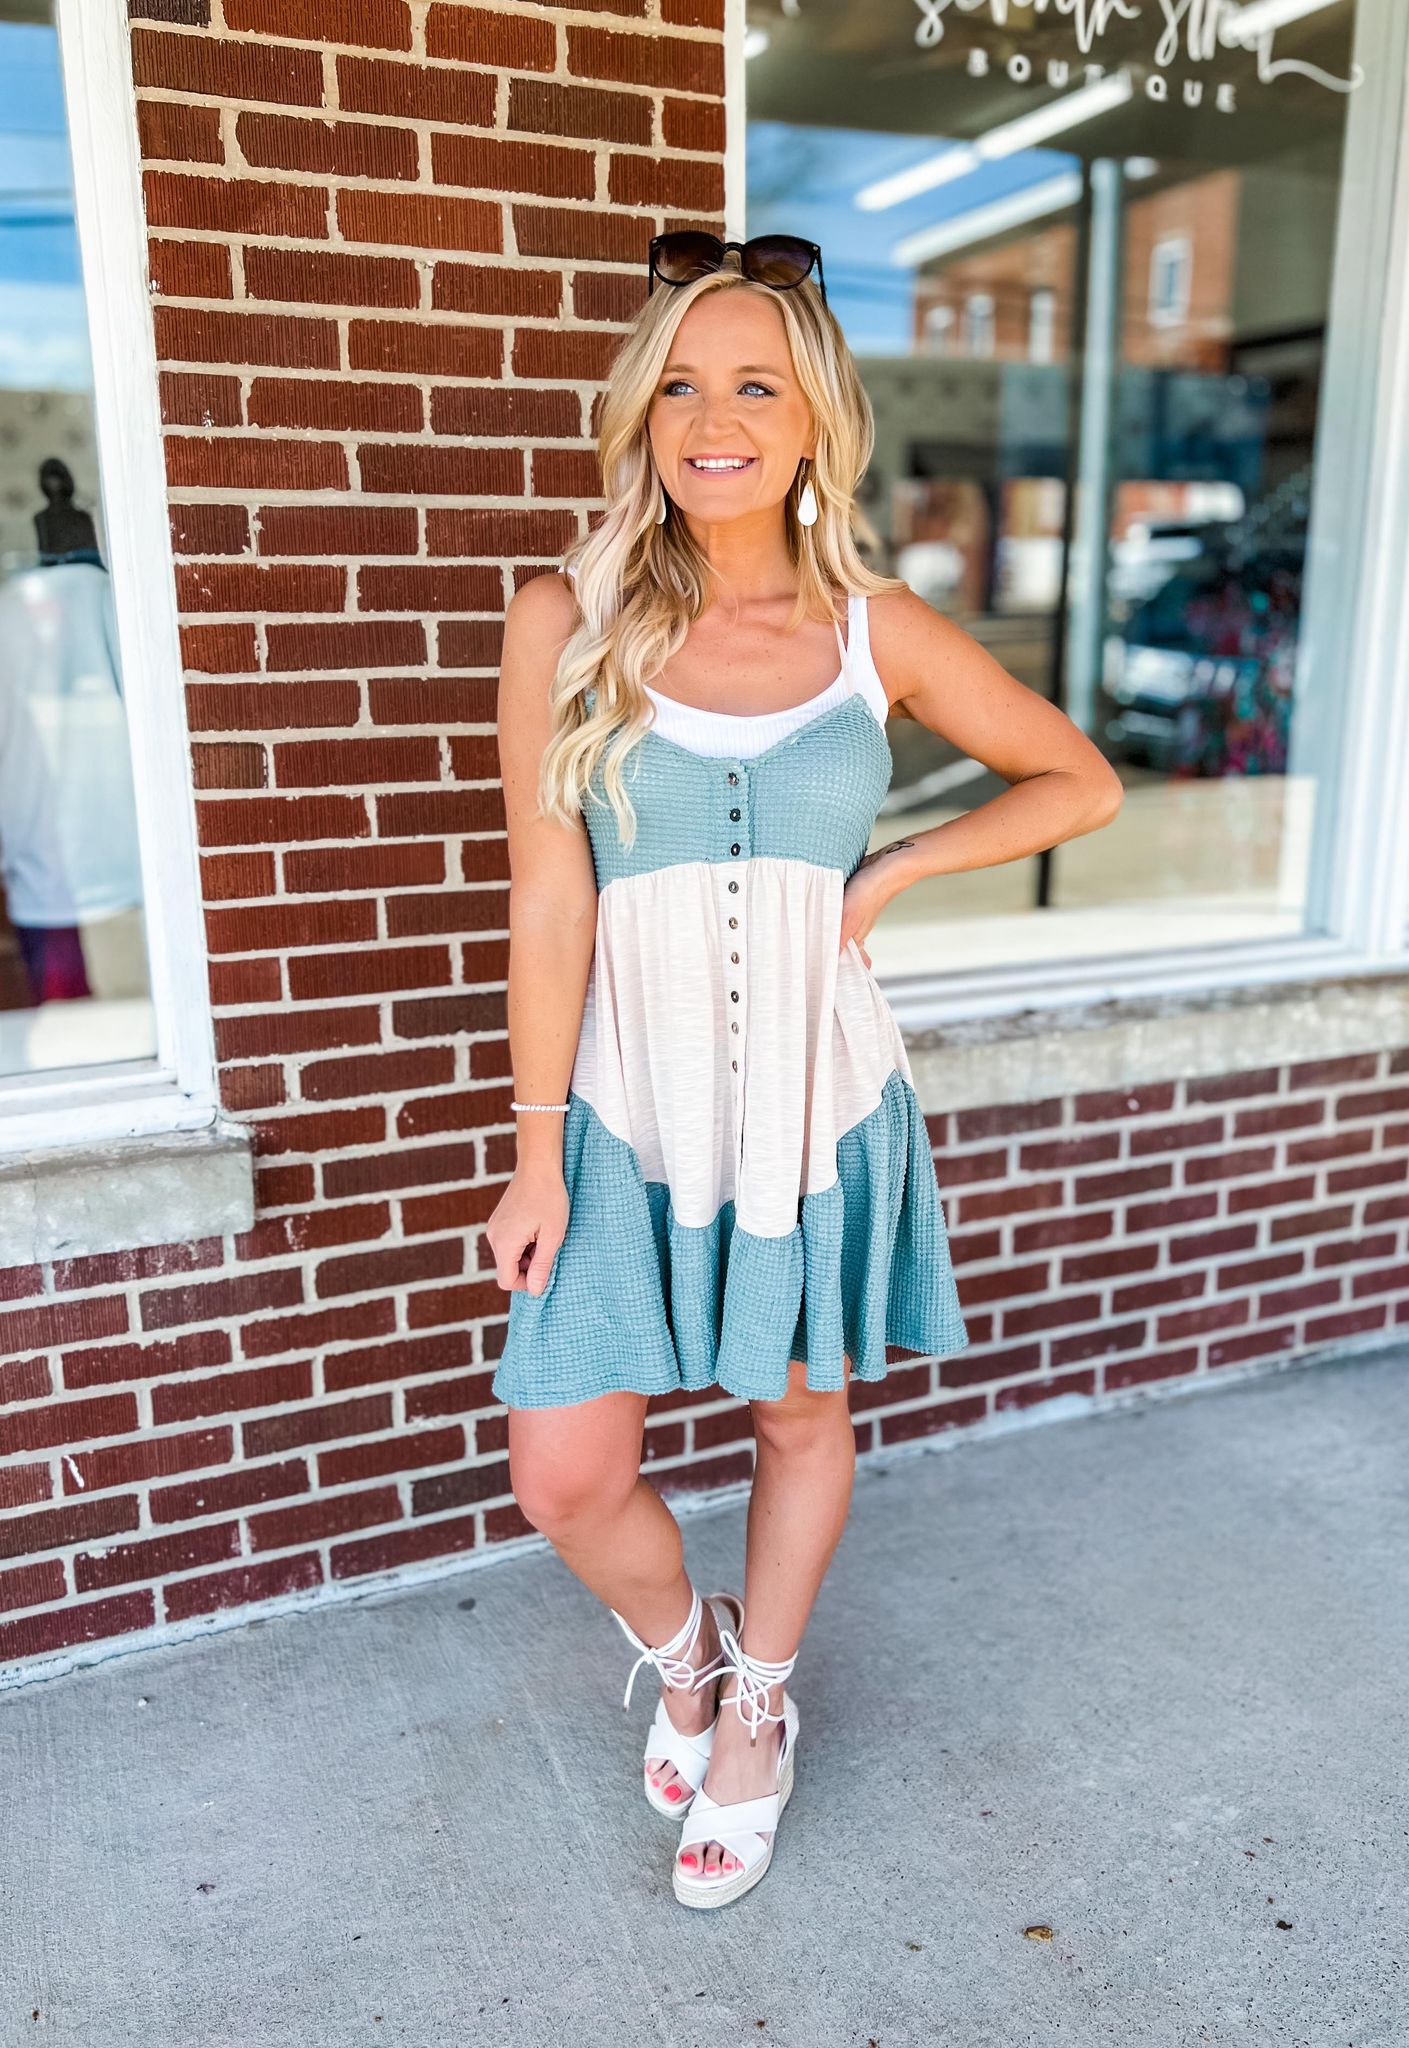 Its About That Time Tunic- Jade ($52.90)